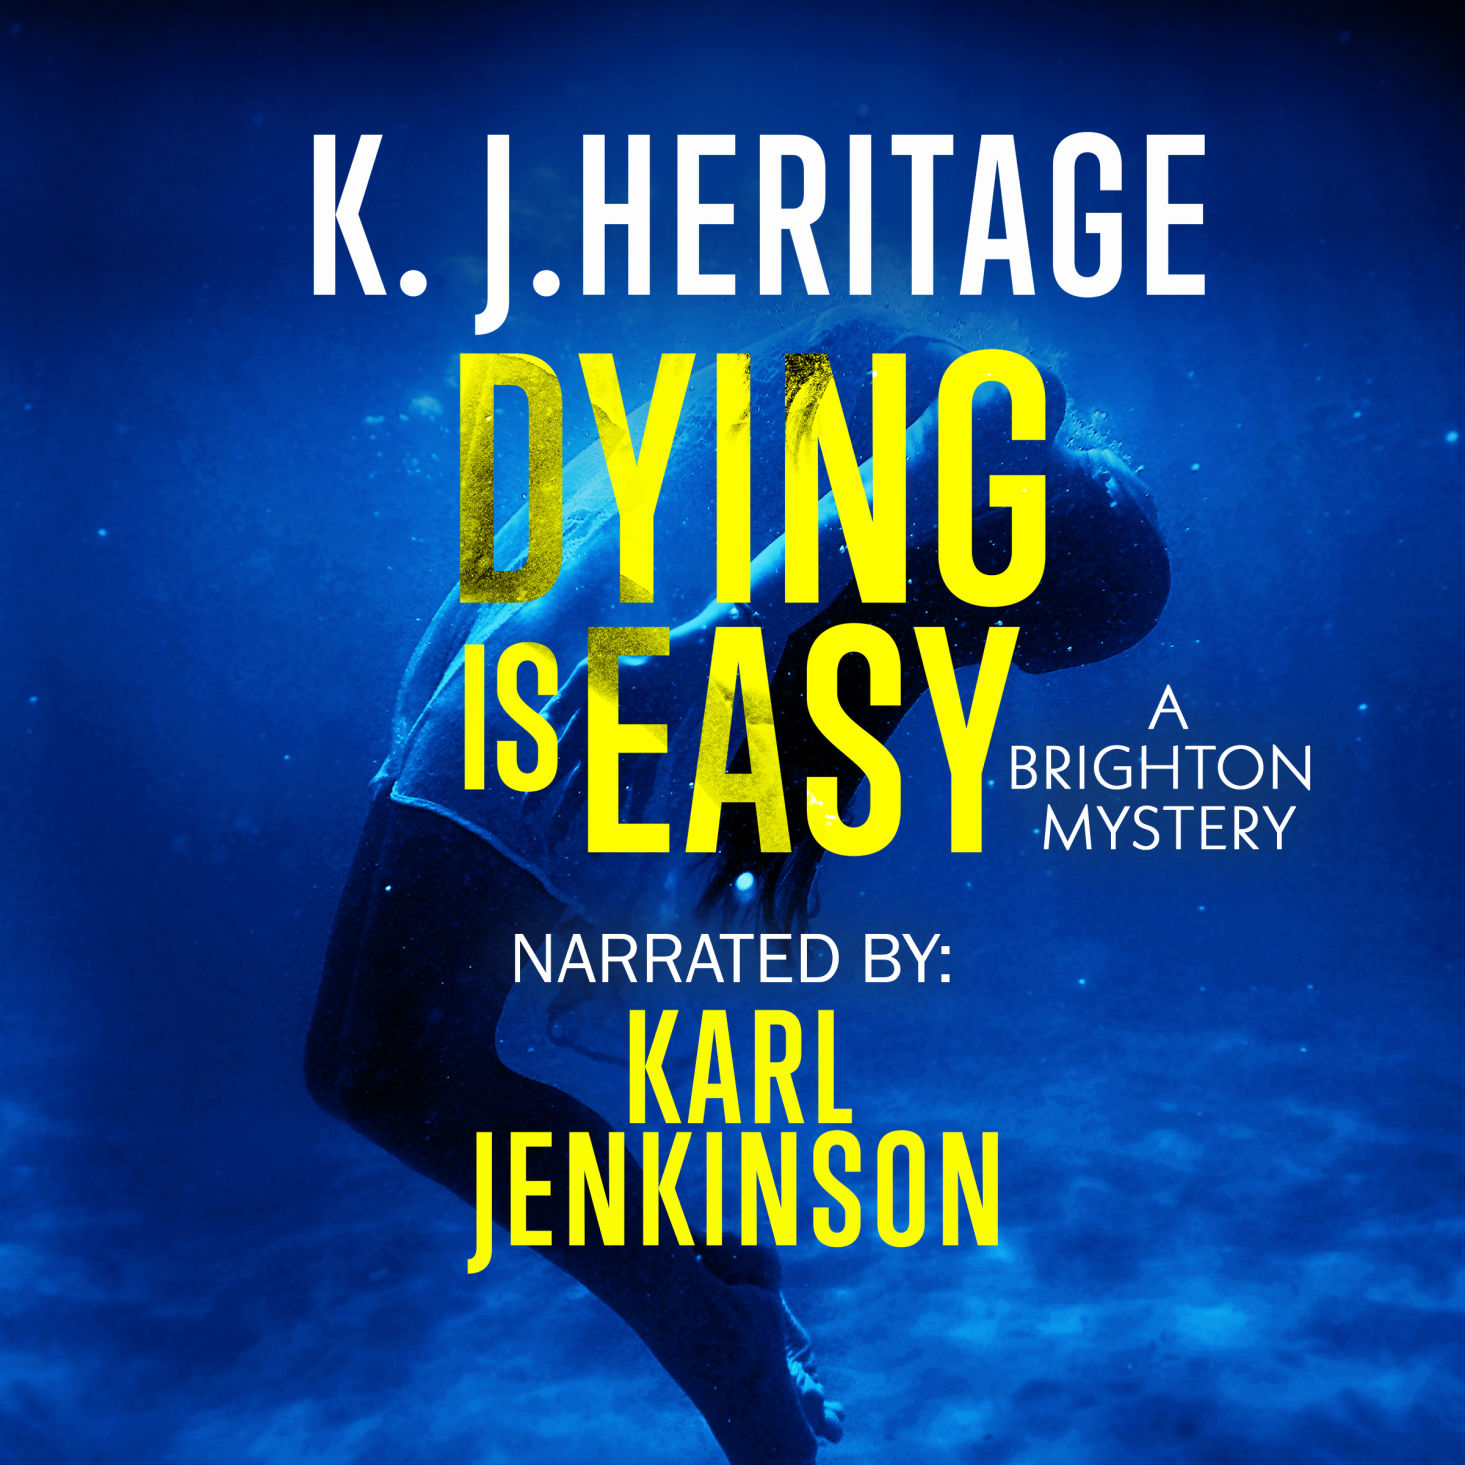 Dying Is Easy by K.J.Heritage